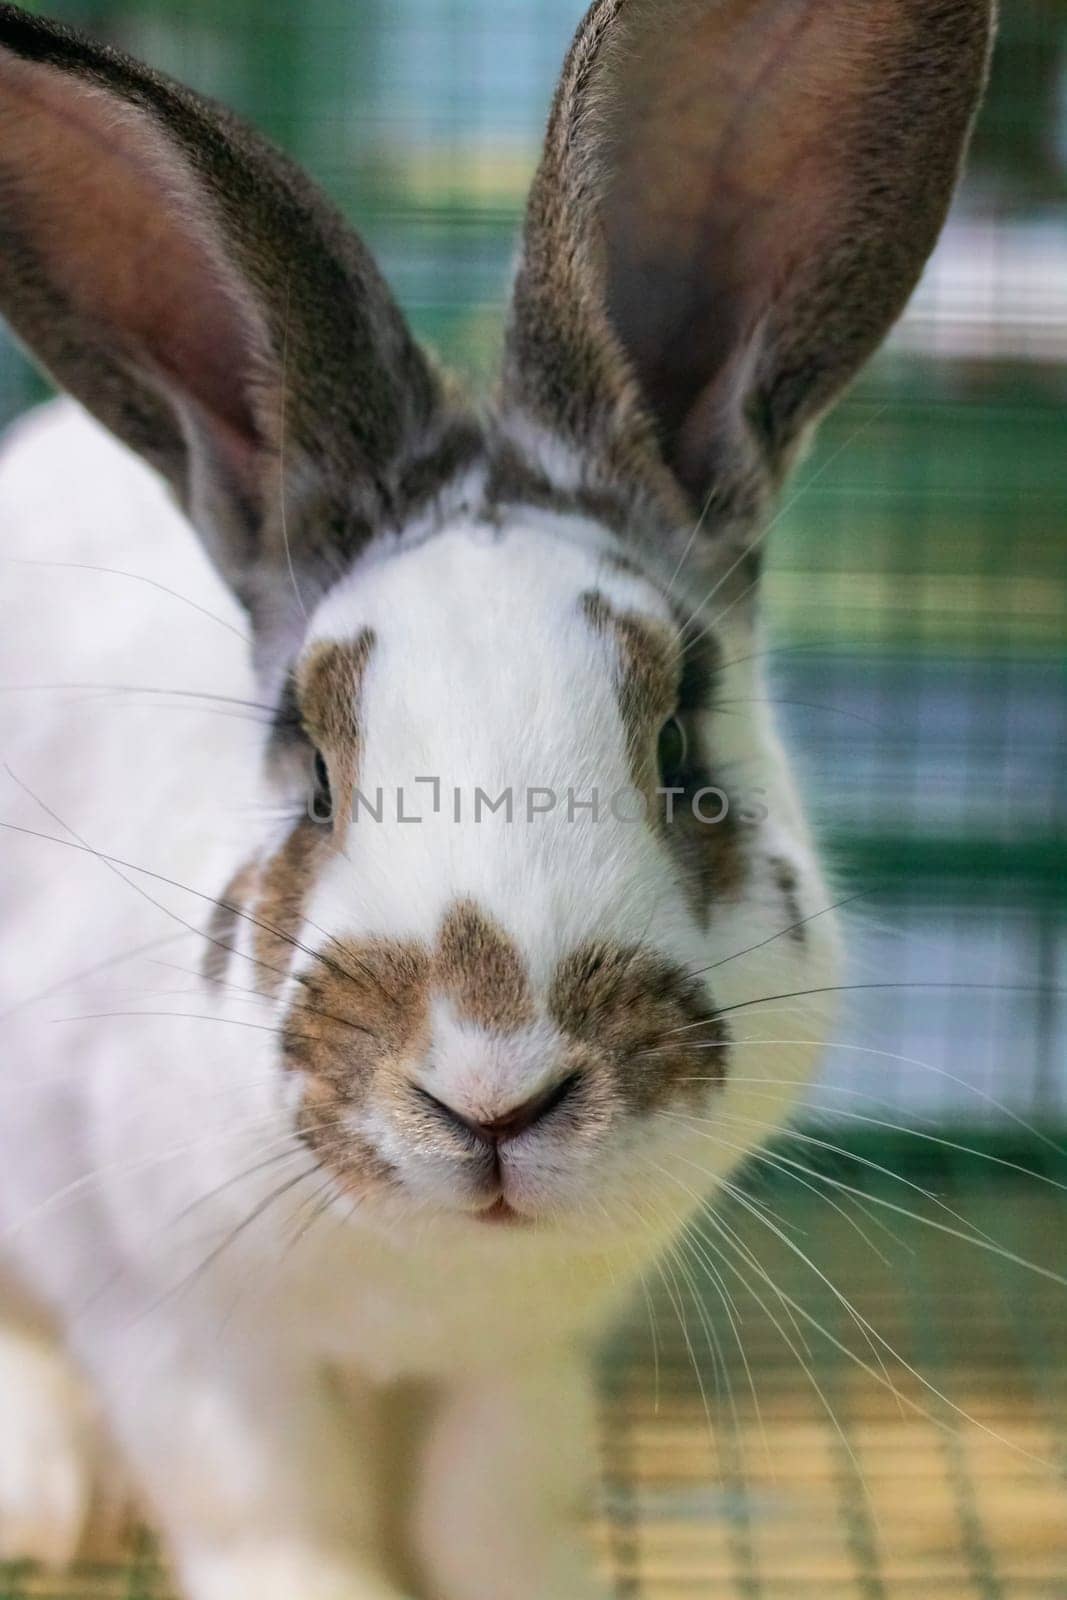 Home spotted white rabbit in a cage, close up portrait